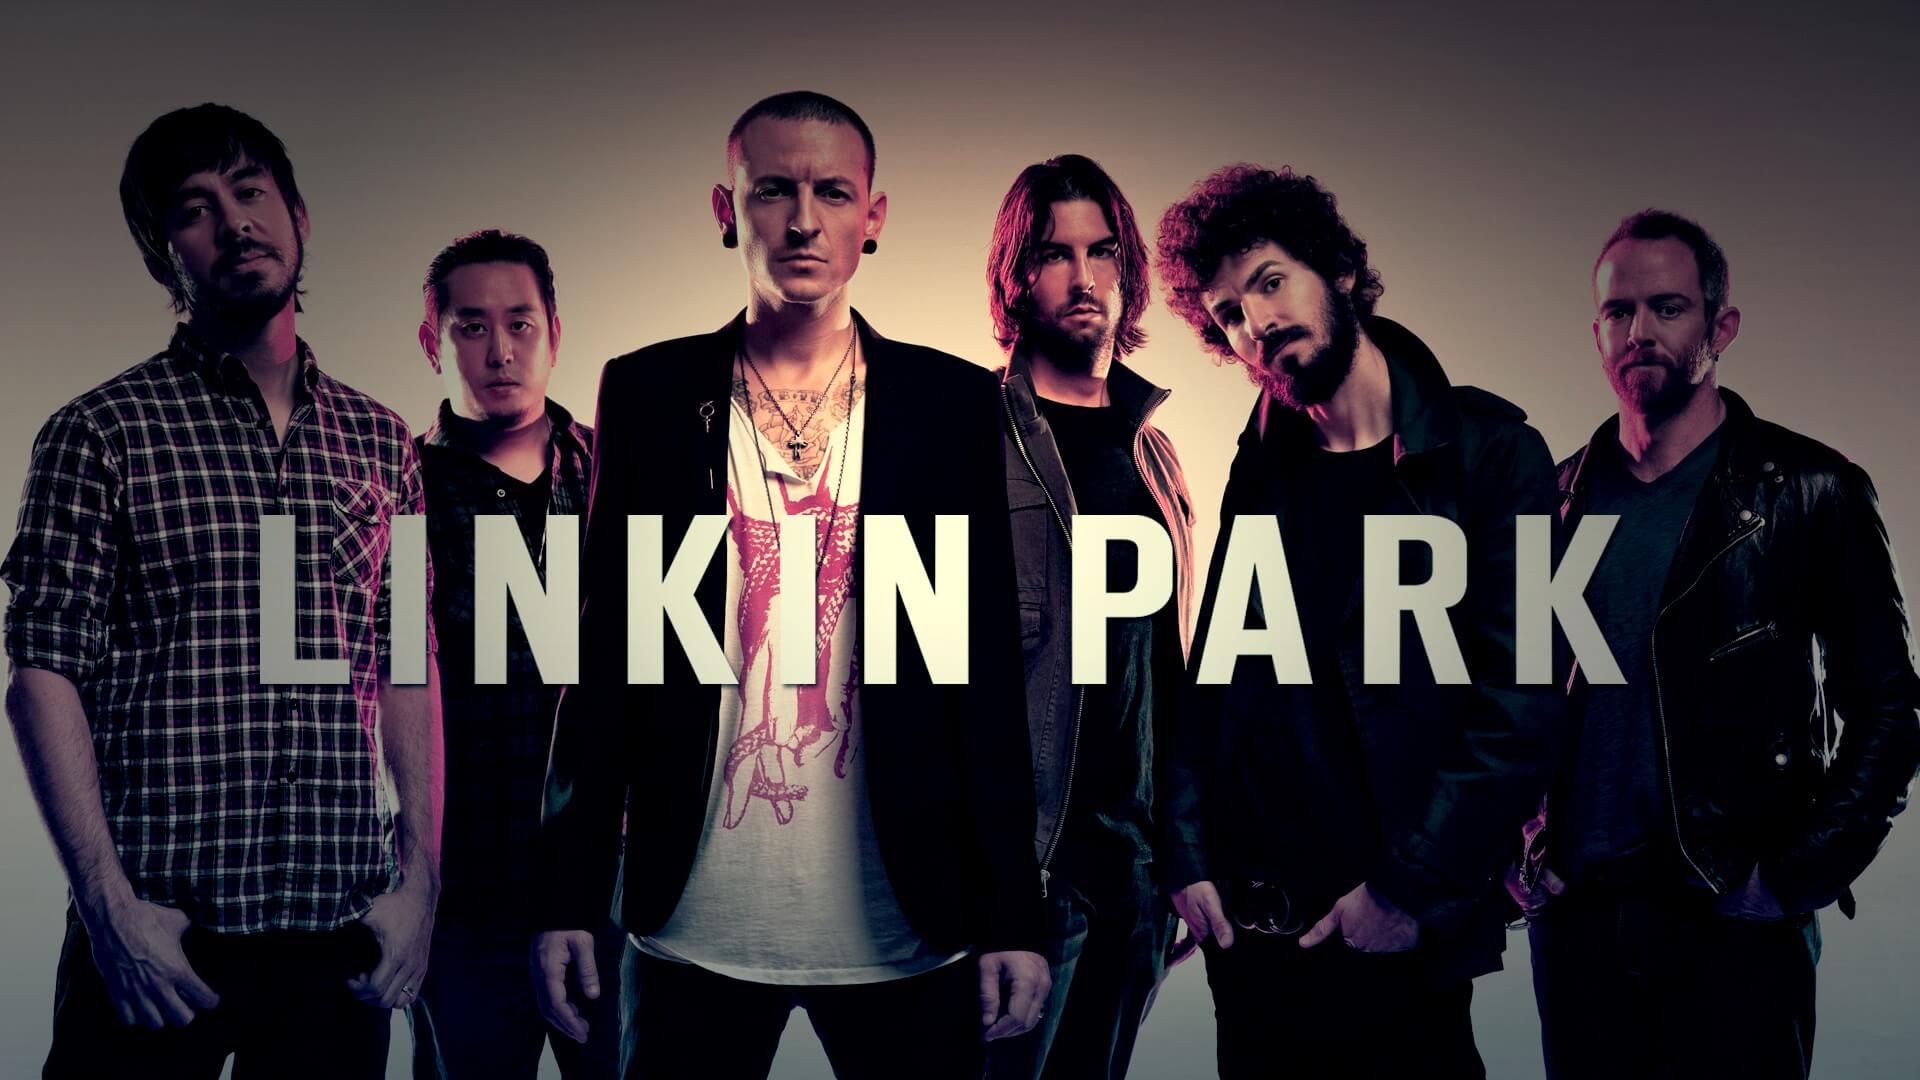 Linkin Park’s Tribute Concert To Chester Bennington will be streamed live